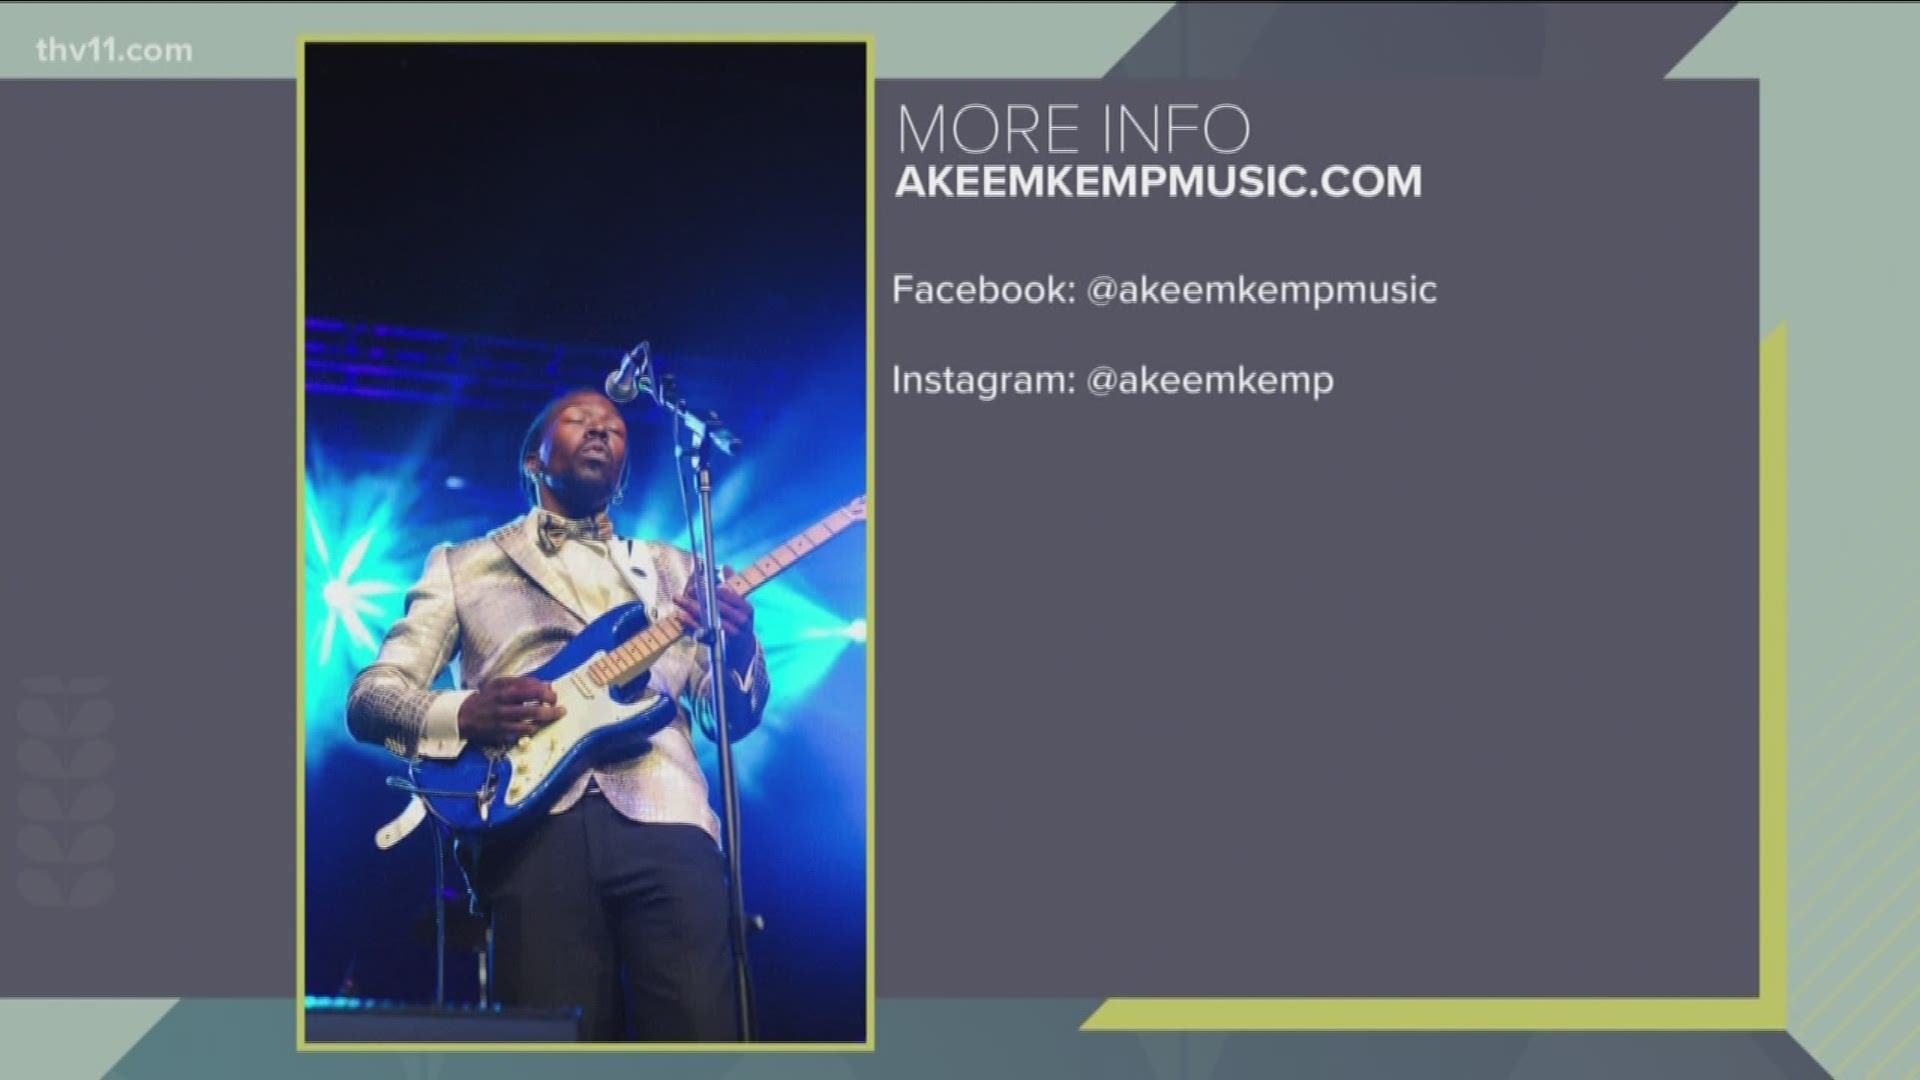 Akeem Kemp Band is a local Blues artist fundraising to attend the International Blues Competition in Memphis.